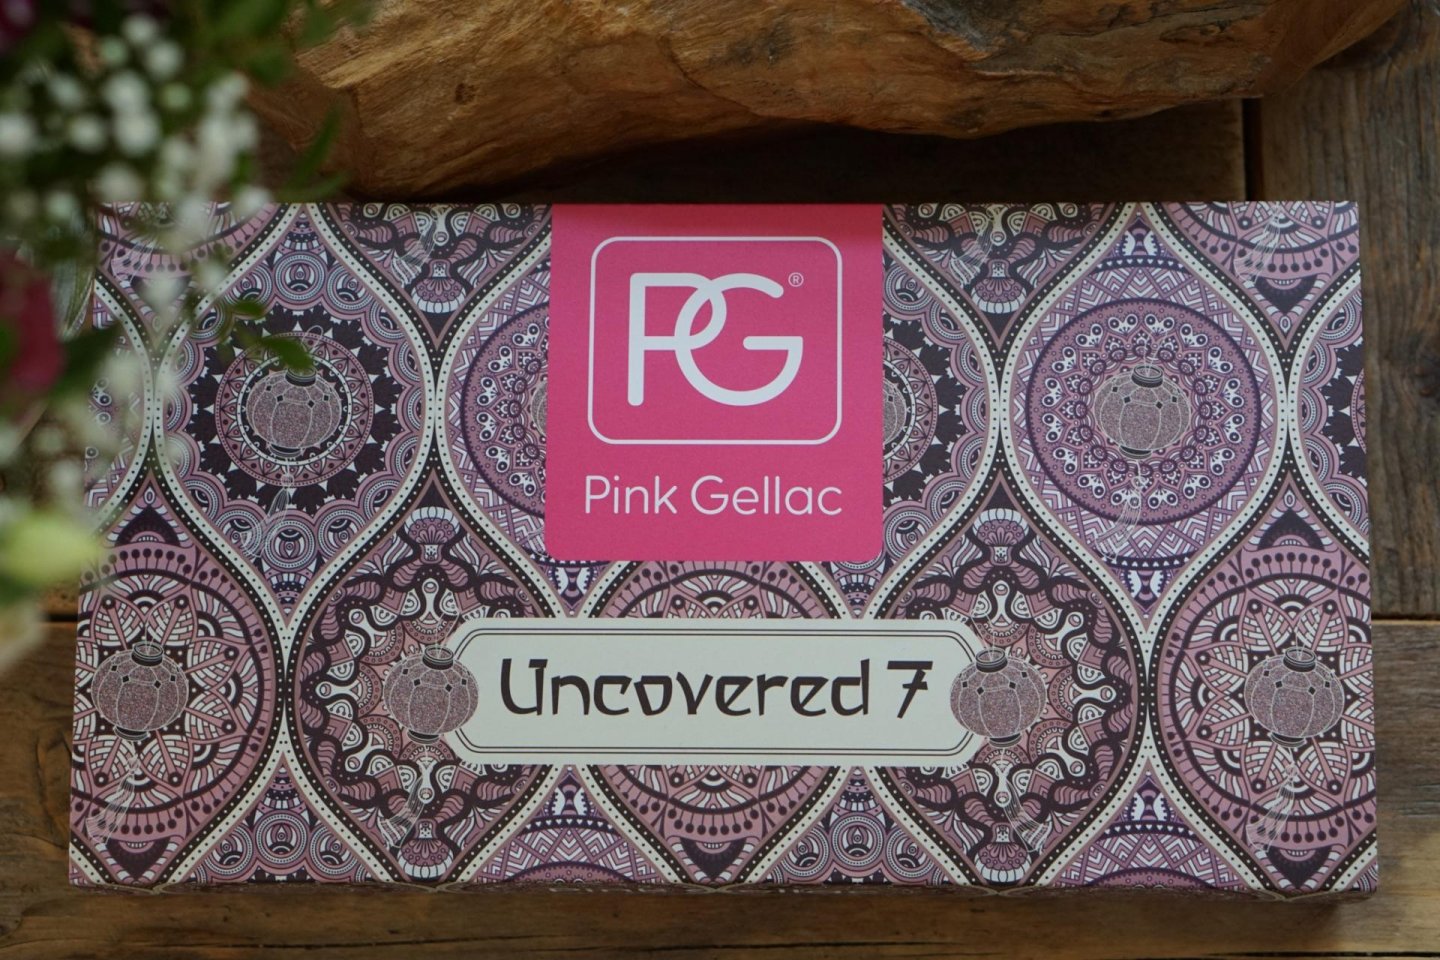 Pink Gellac Uncovered 7 swatches